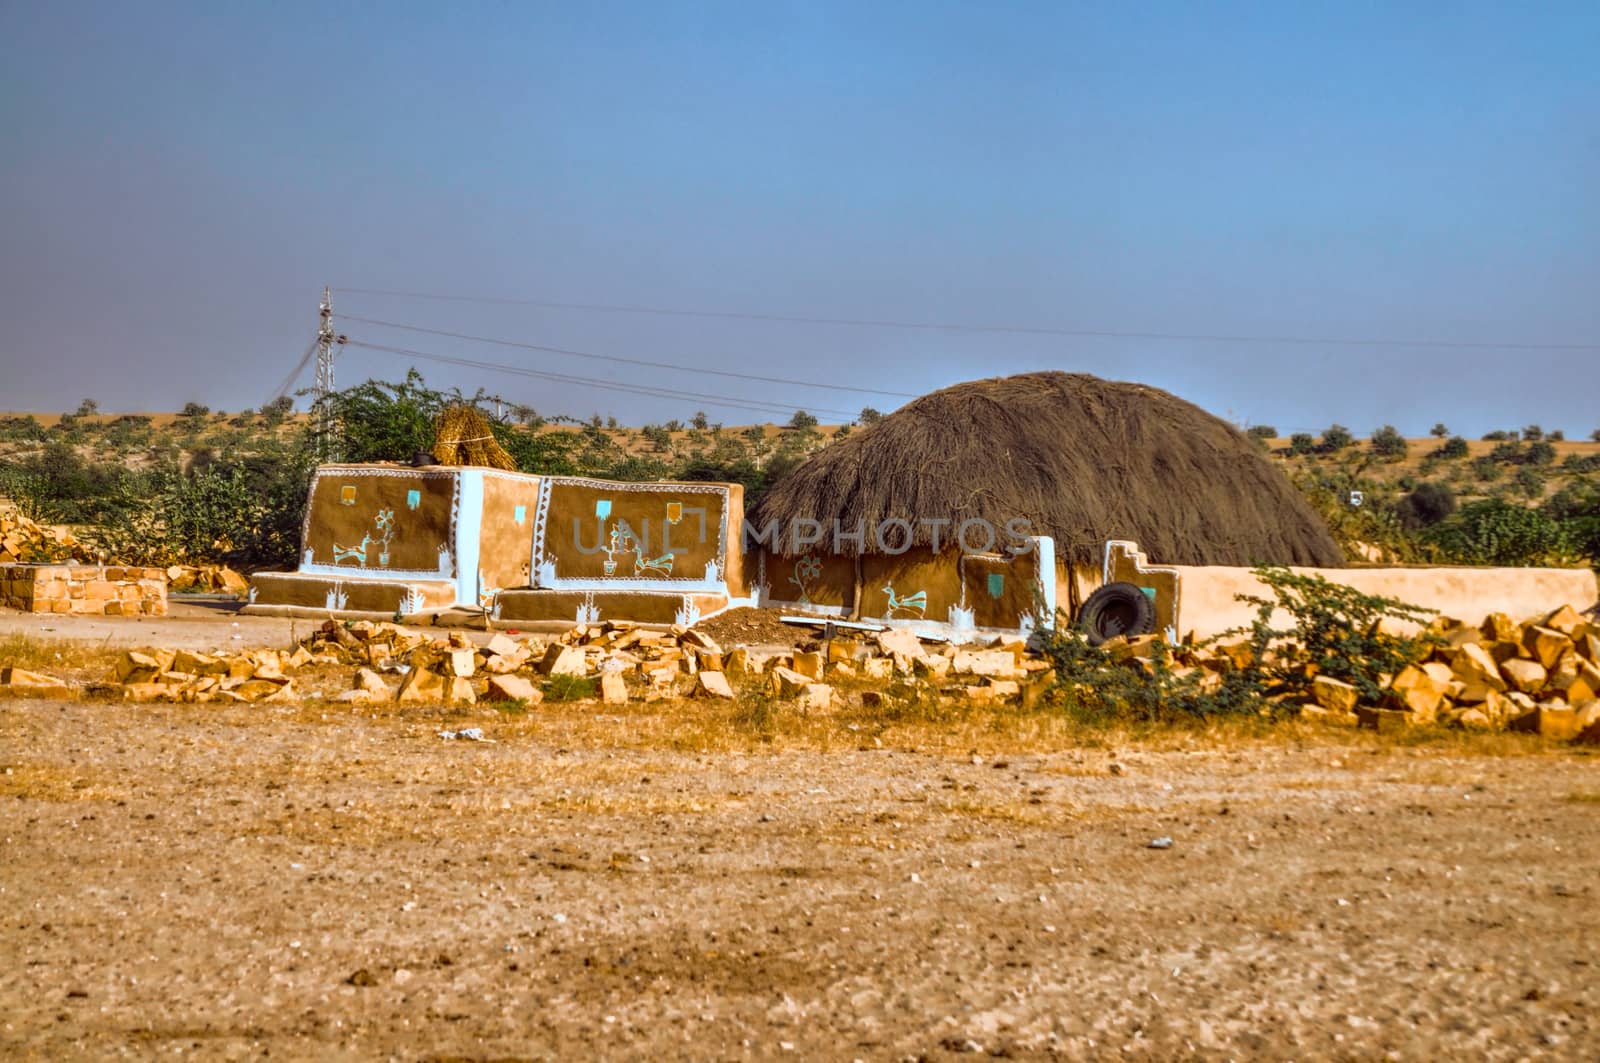 House in That desert, India by MichalKnitl